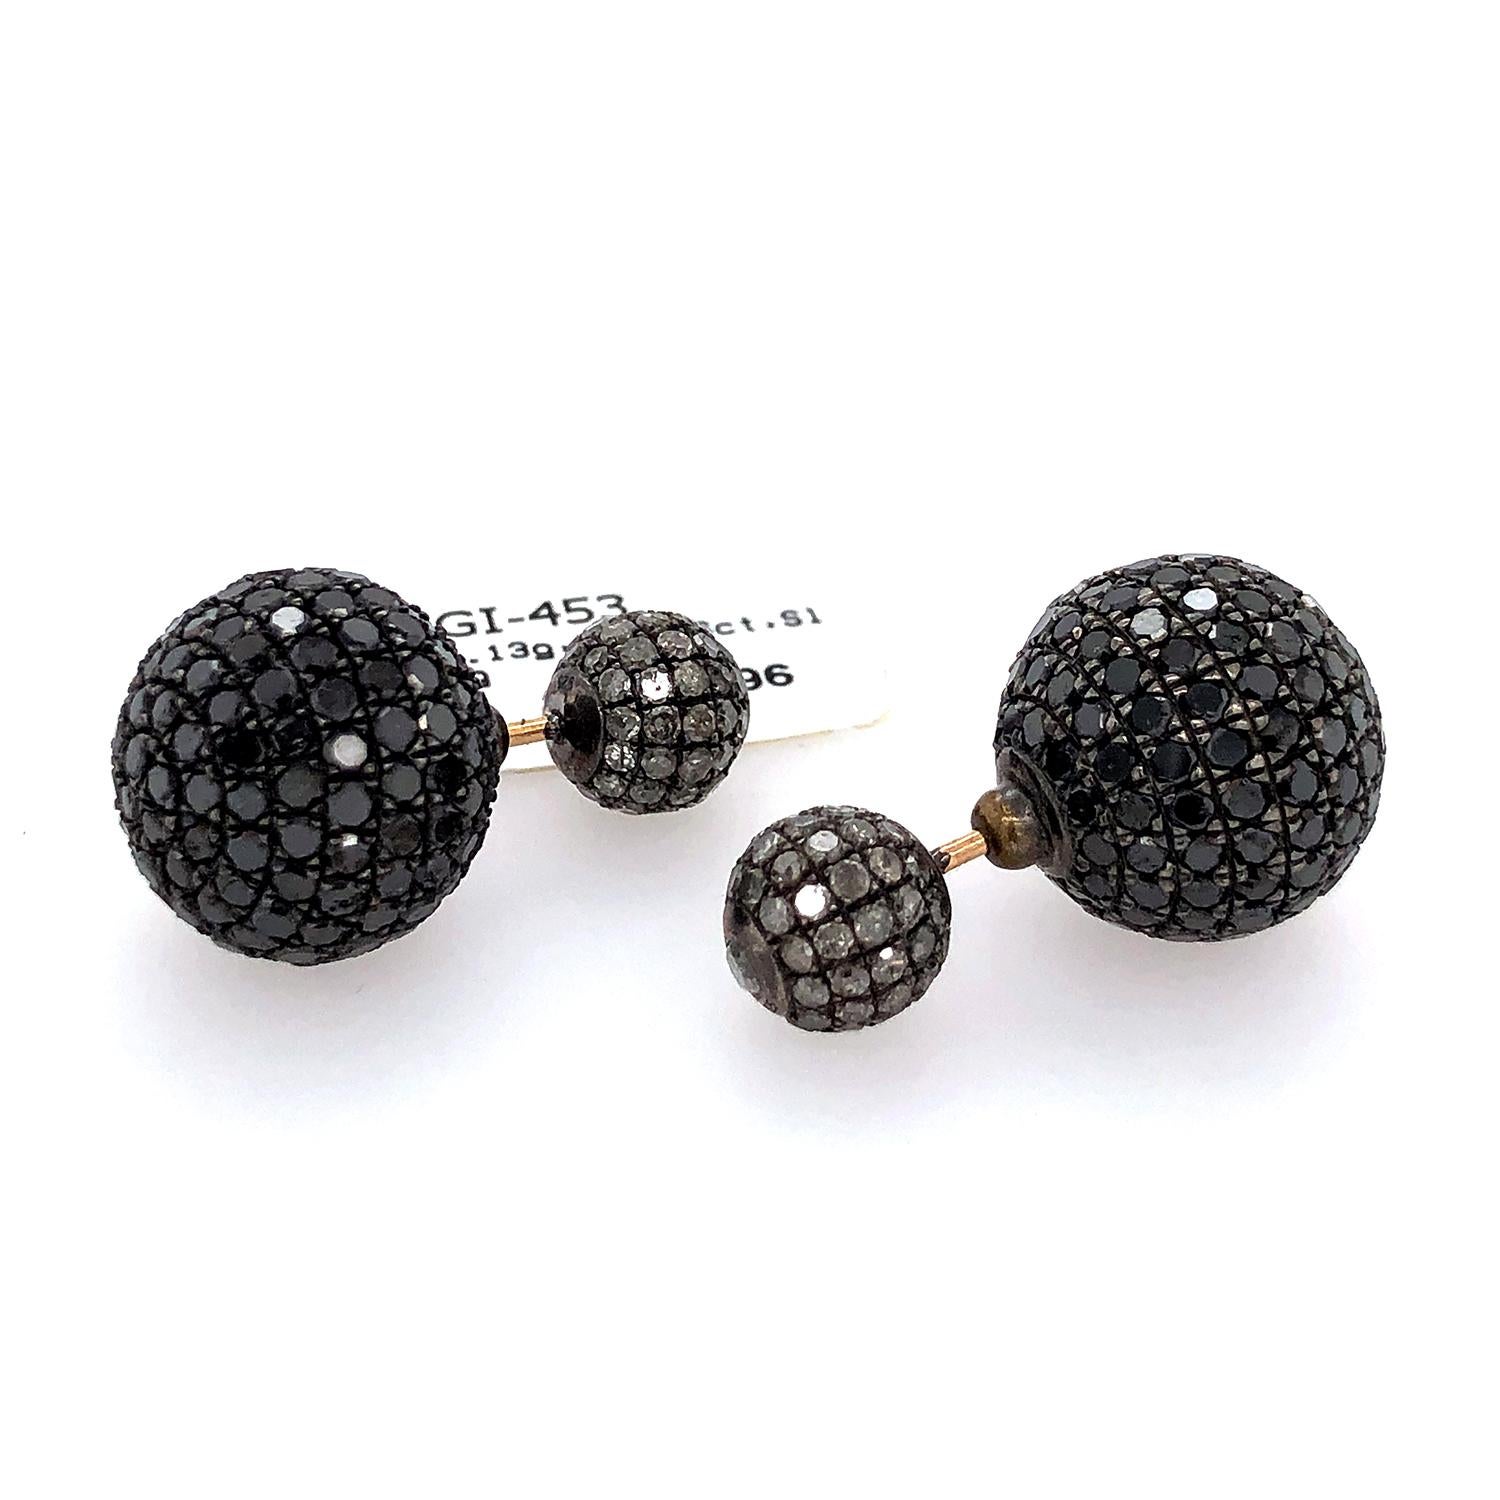 Pave Diamond Ball Tunnel Earrings Made in 18k Gold & Silver (Kunsthandwerker*in) im Angebot